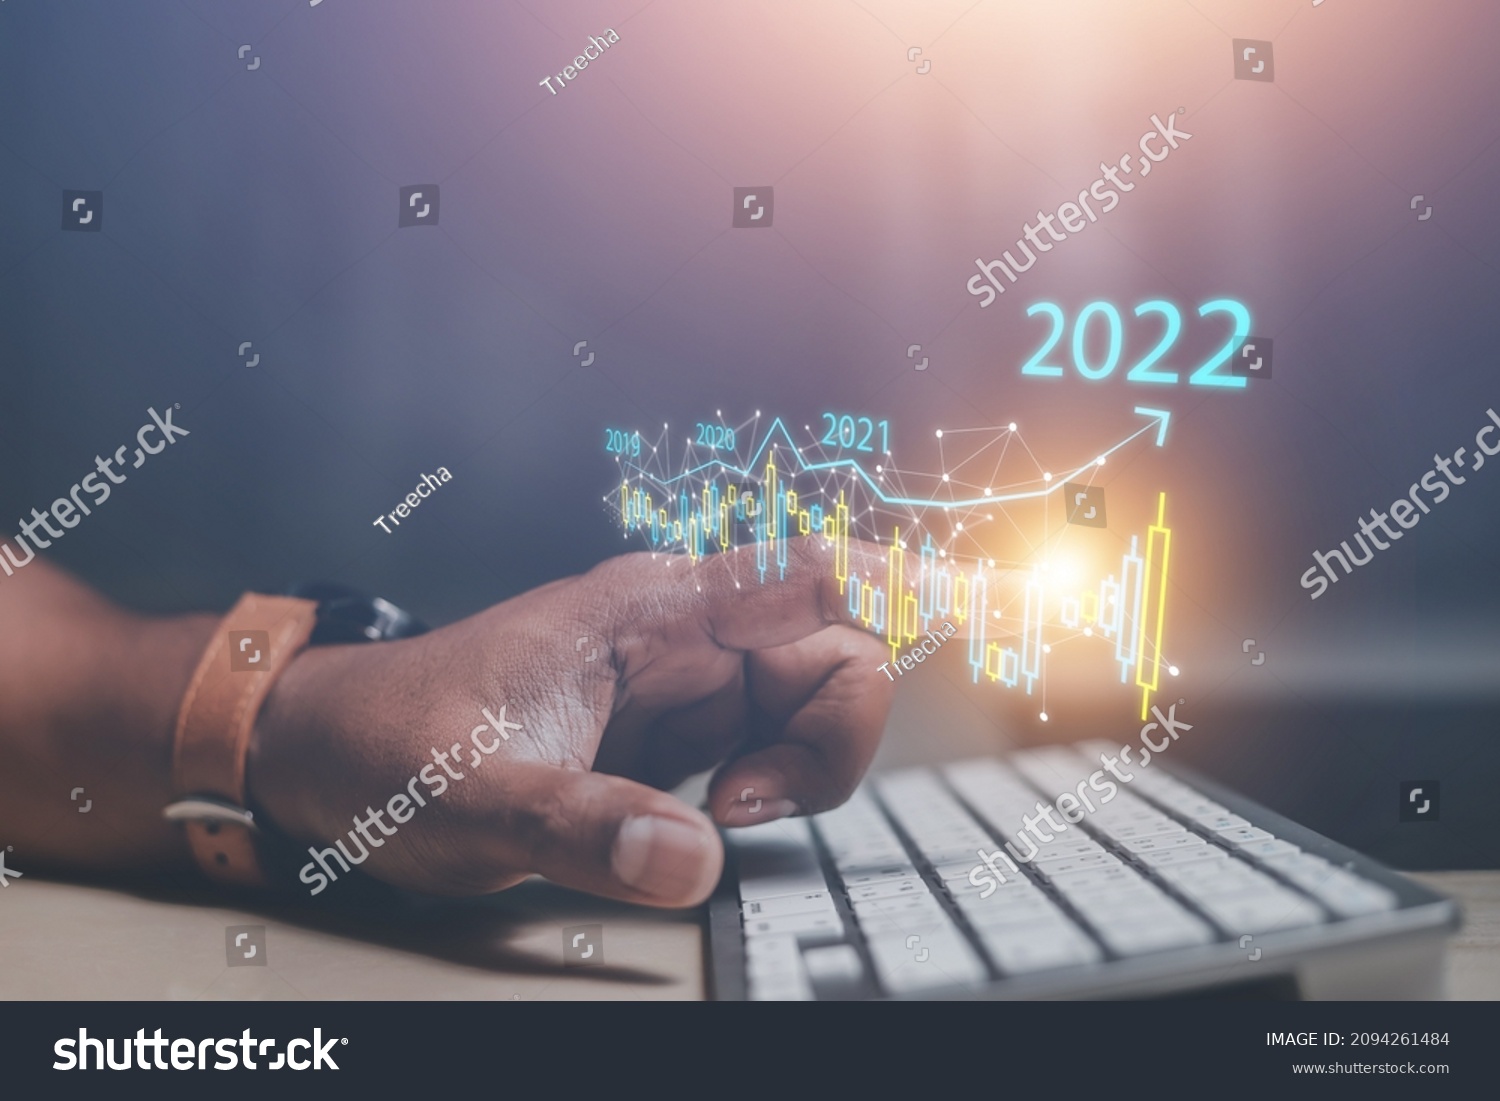 Businessmen analyze business investments in this new year. Demonstrates the trends driving digital online shopping to develop future online businesses. 2022 concept
 #2094261484